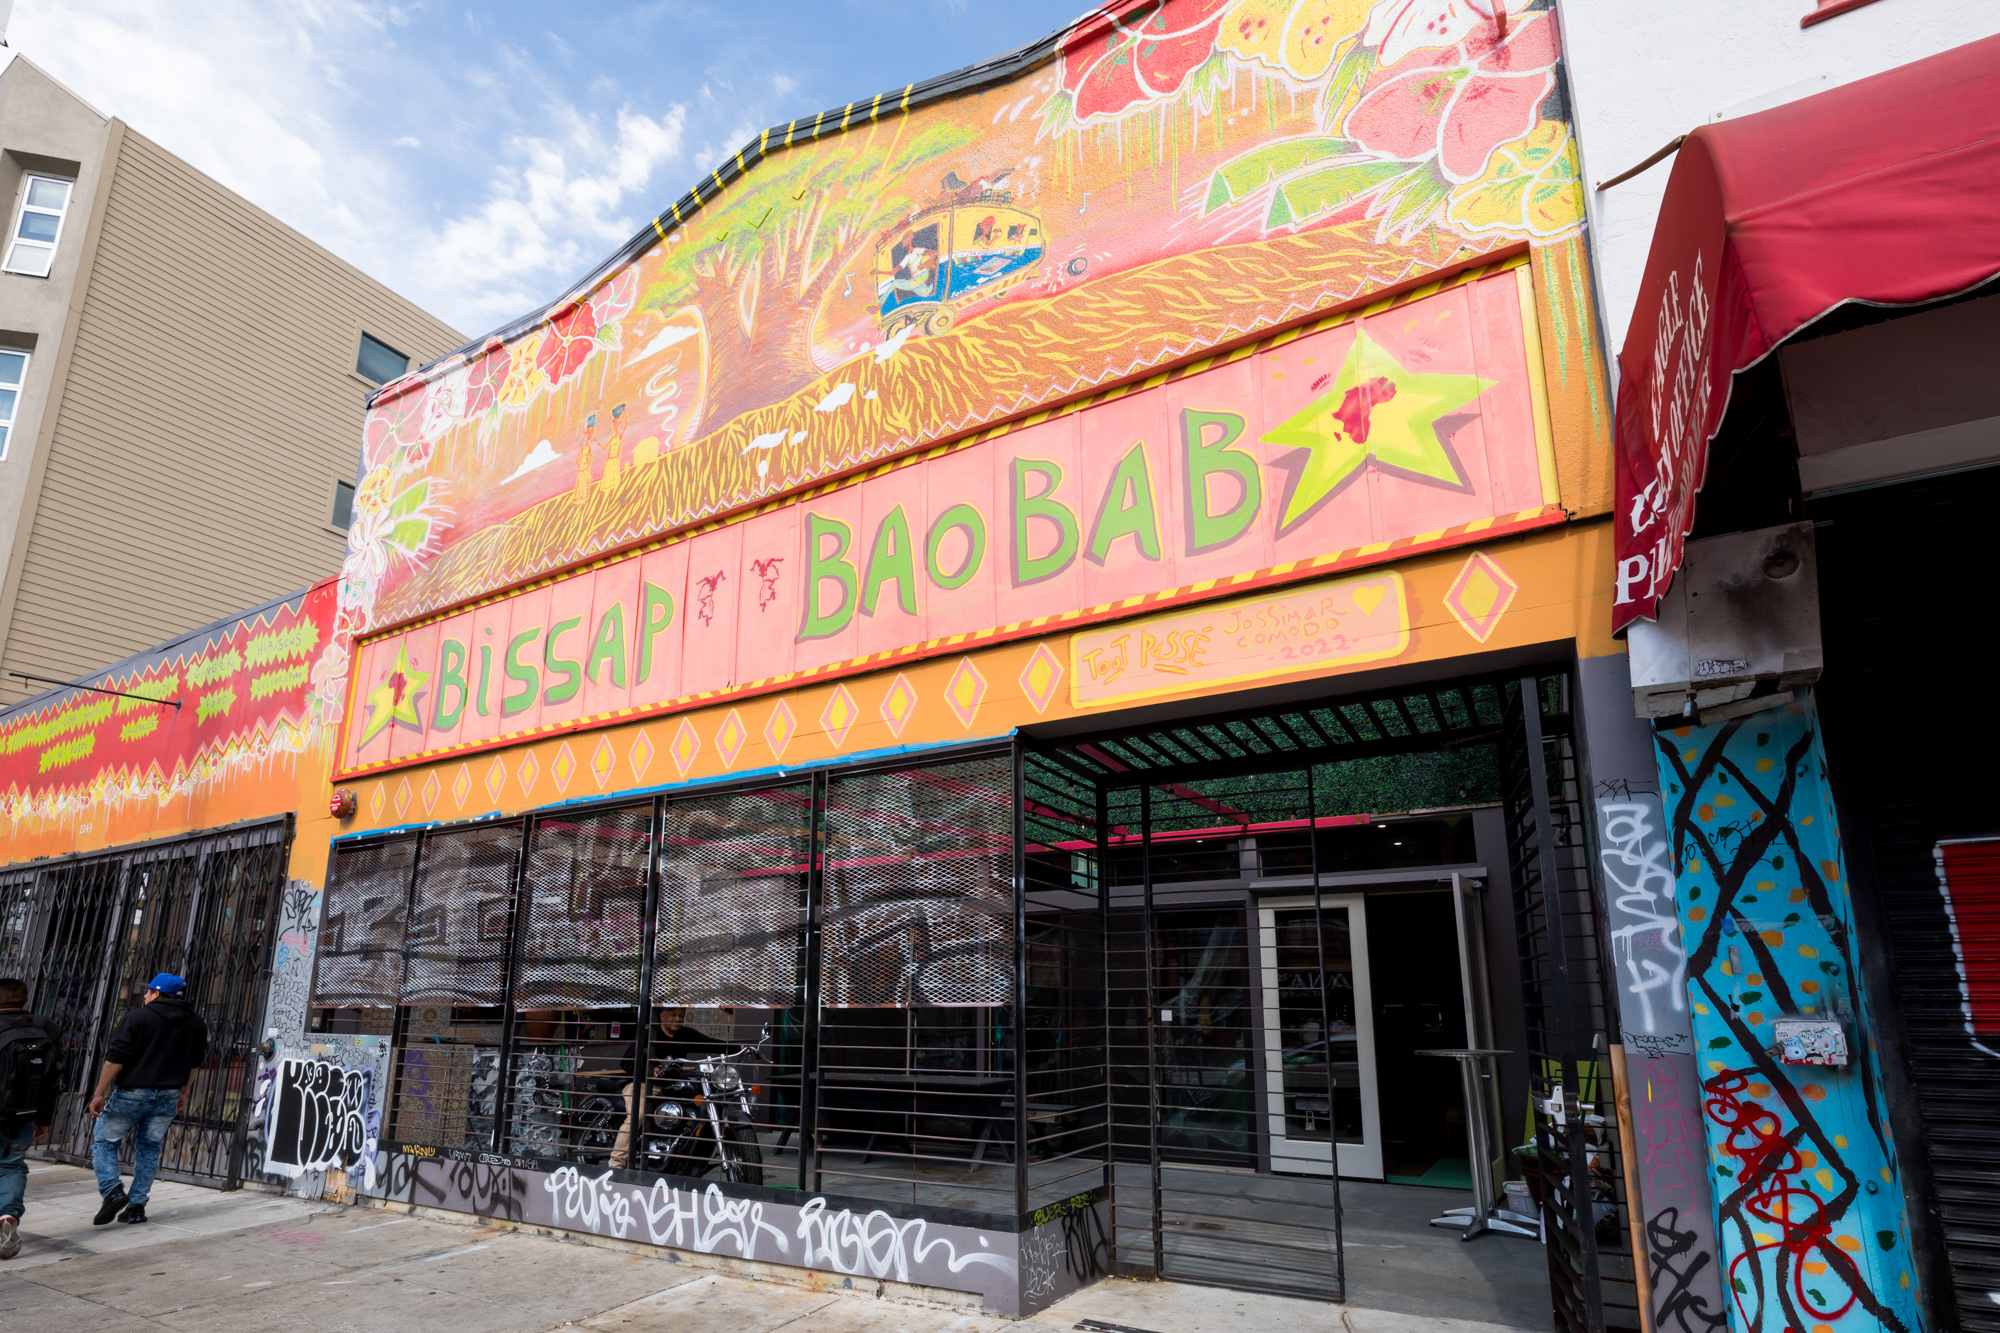 The exterior of Big Baobab painted in orange, pink, and yellow.